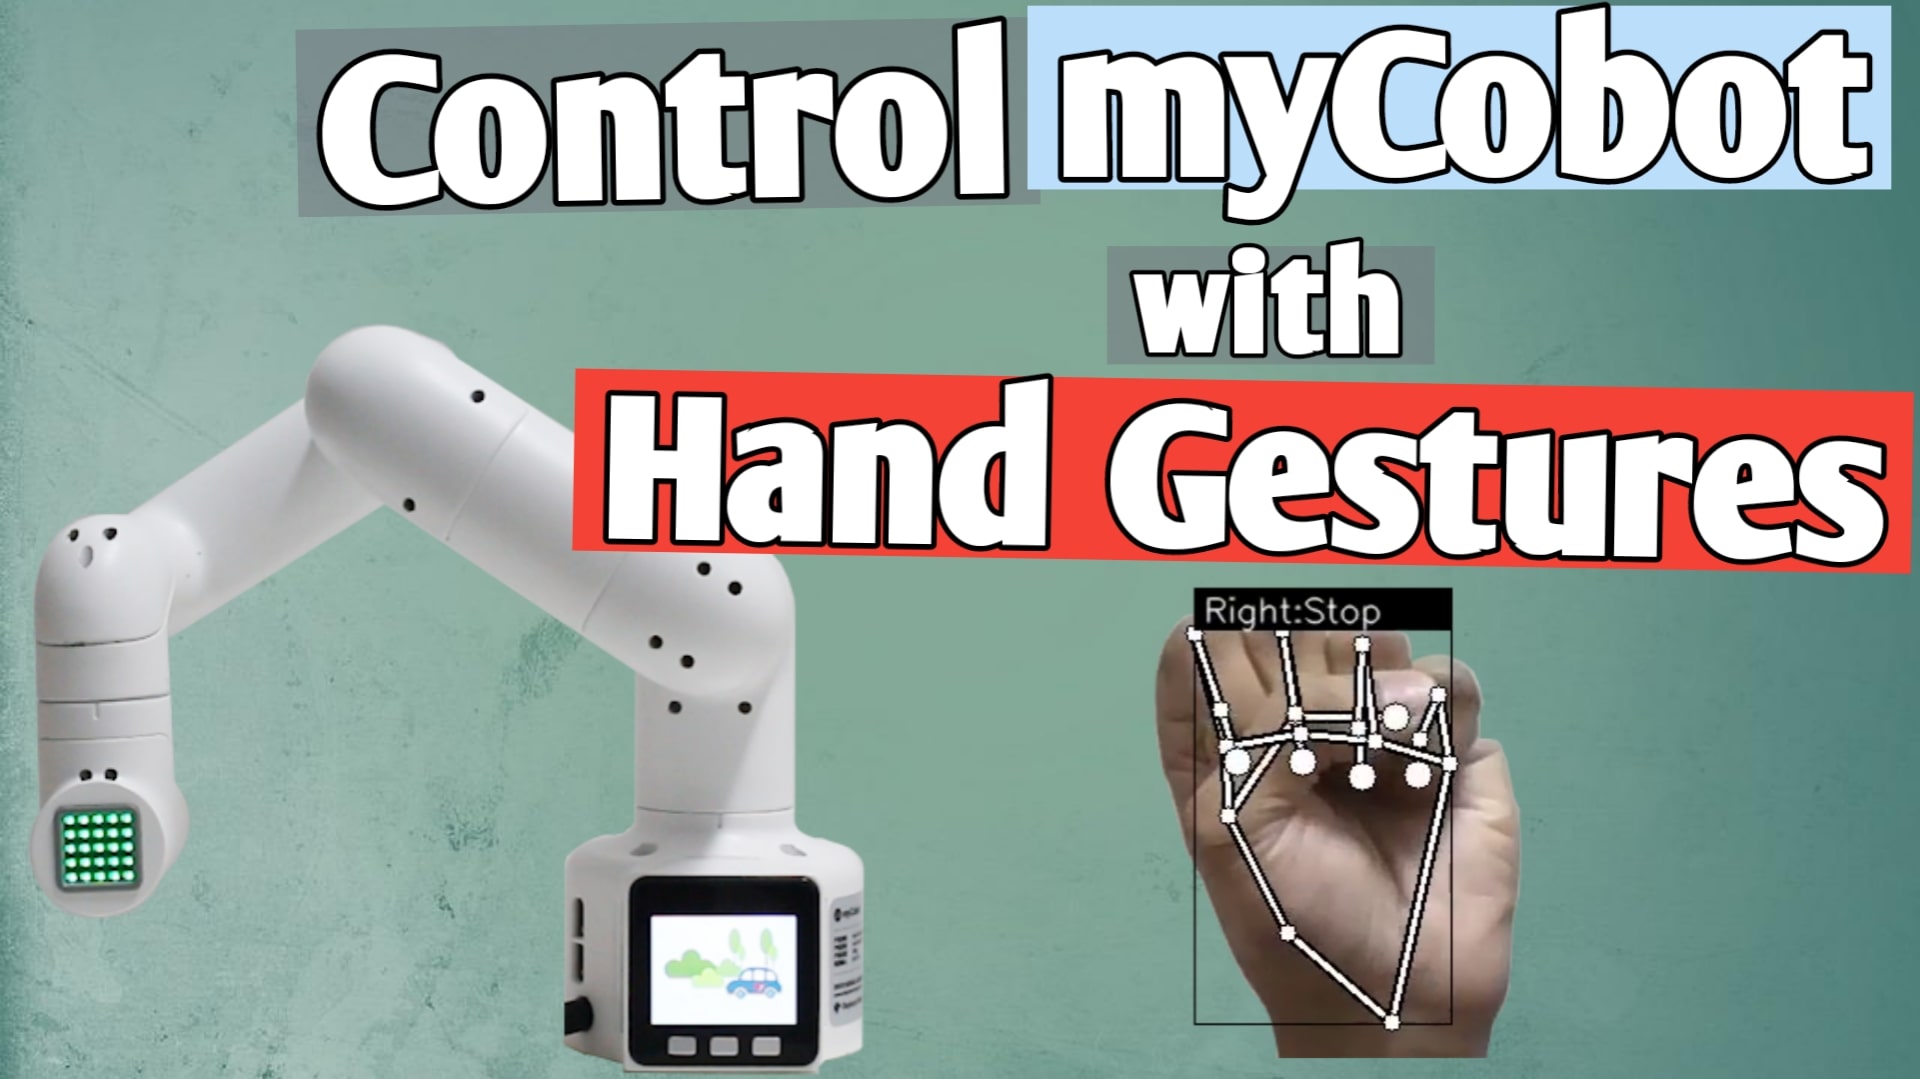 Control myCobot with Hand Gestures